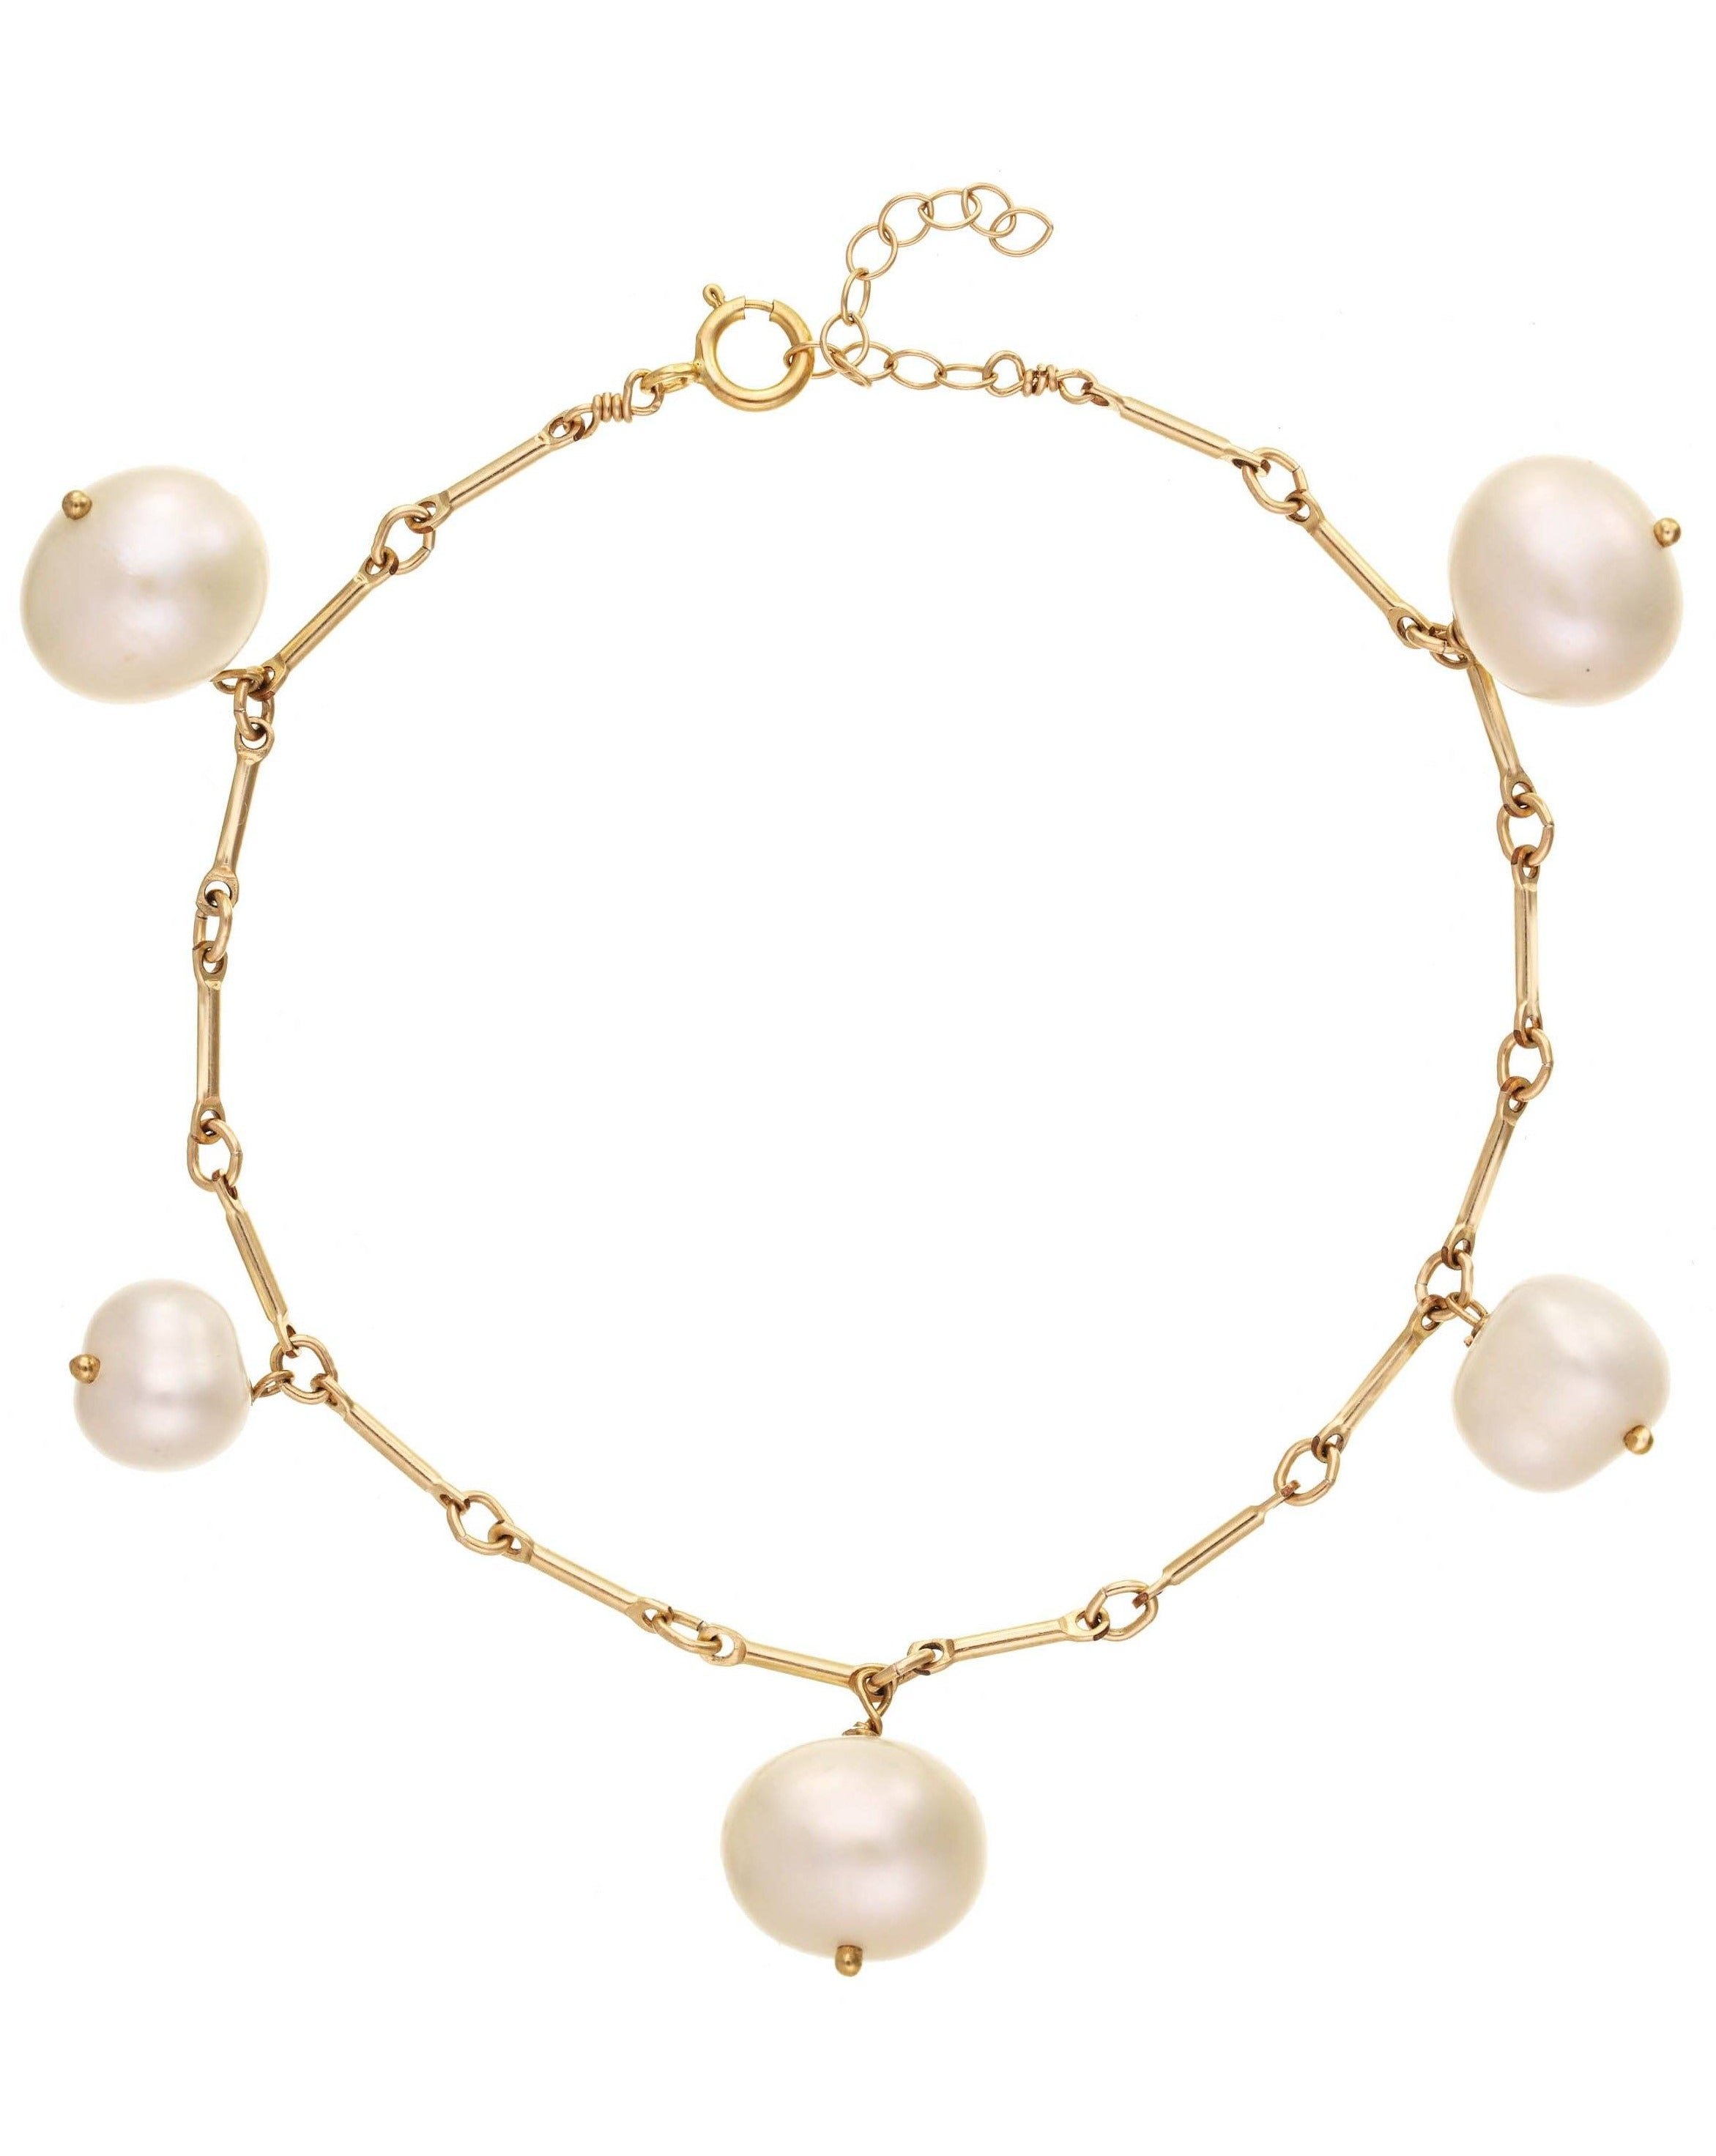 Adeline Bracelet by KOZAKH. A 6 to 7 inch adjustable length bracelet in 14K Gold Filled, featuring round Freshwater Pearls.